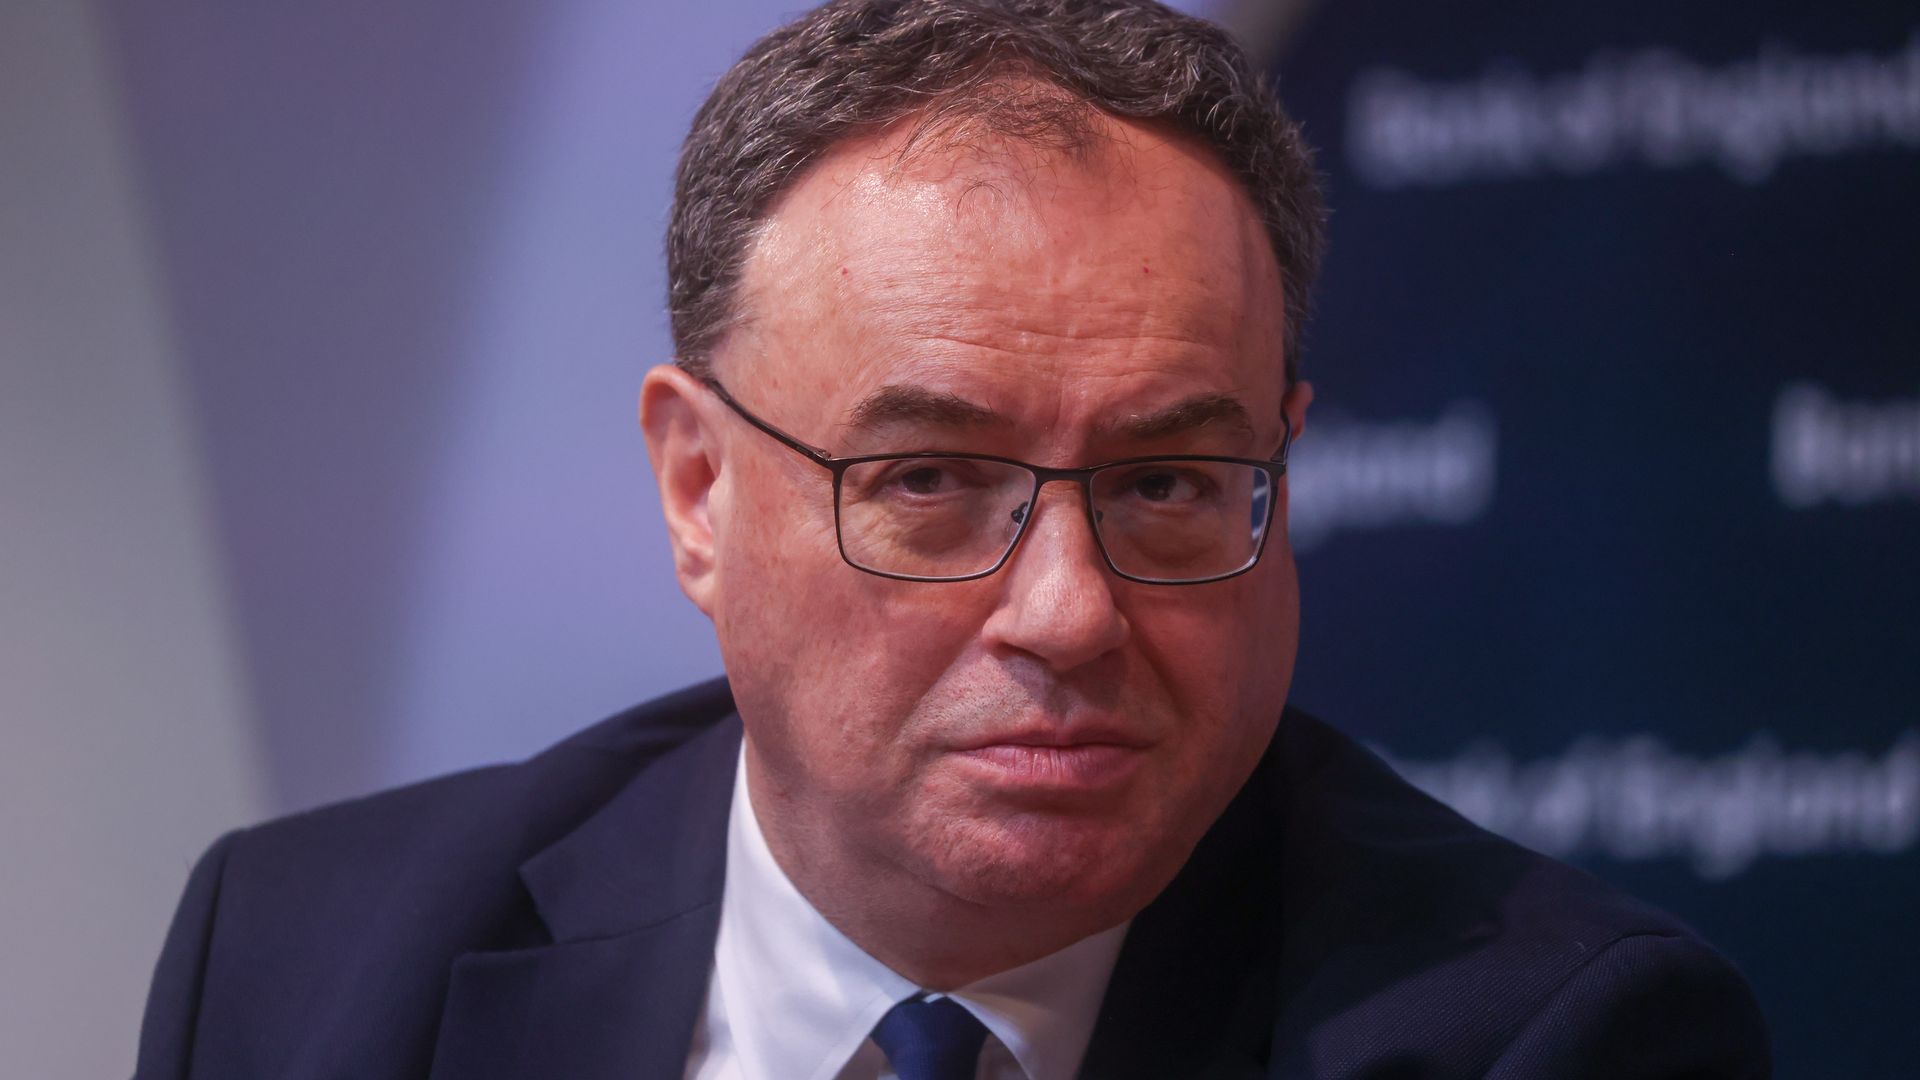 Bank of England governor Andrew Bailey at a press conference